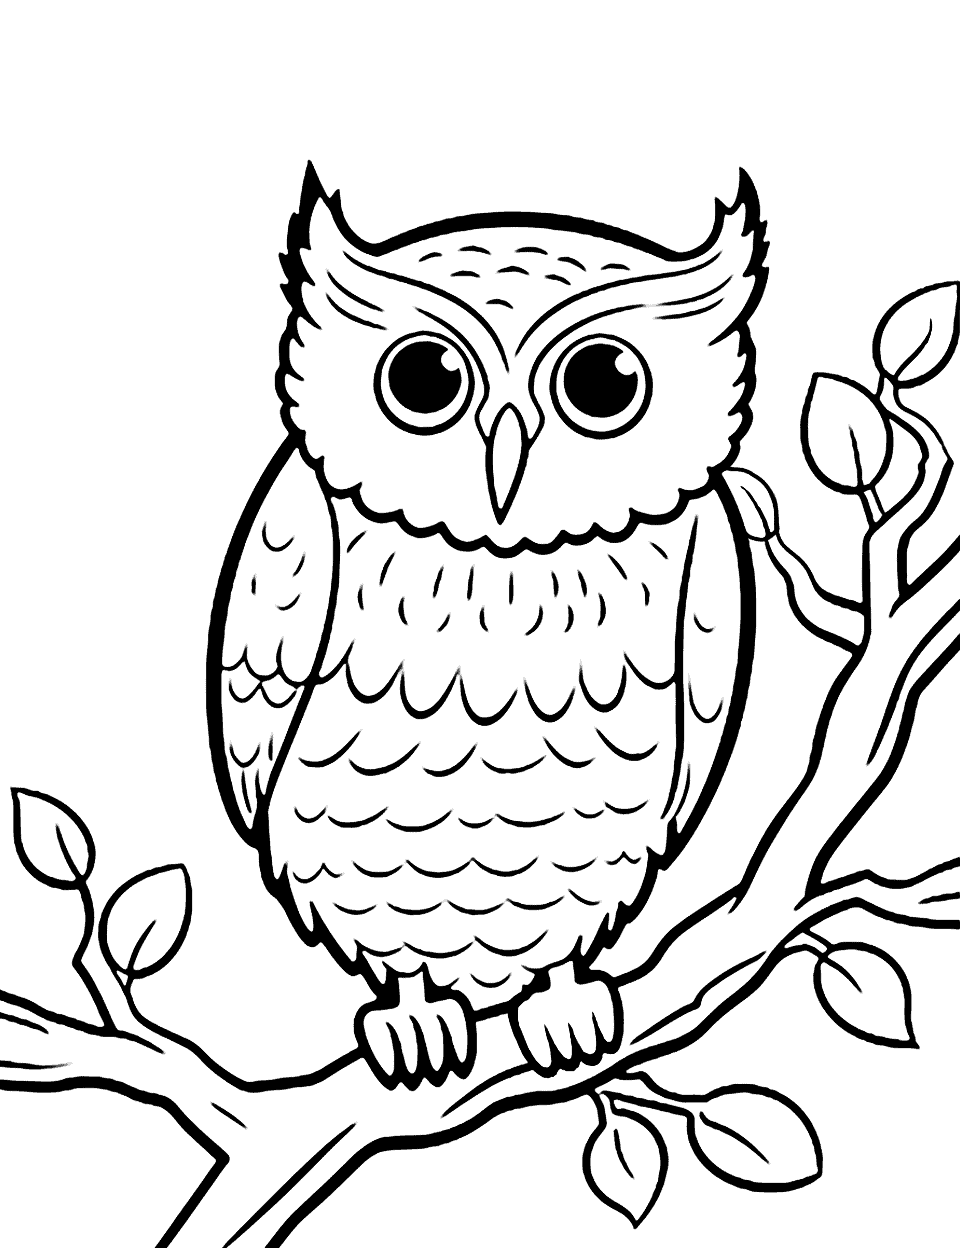 Wise Owl in a Tree Animal Coloring Page - An owl perched on a tree branch with wide eyes and a contemplative look.